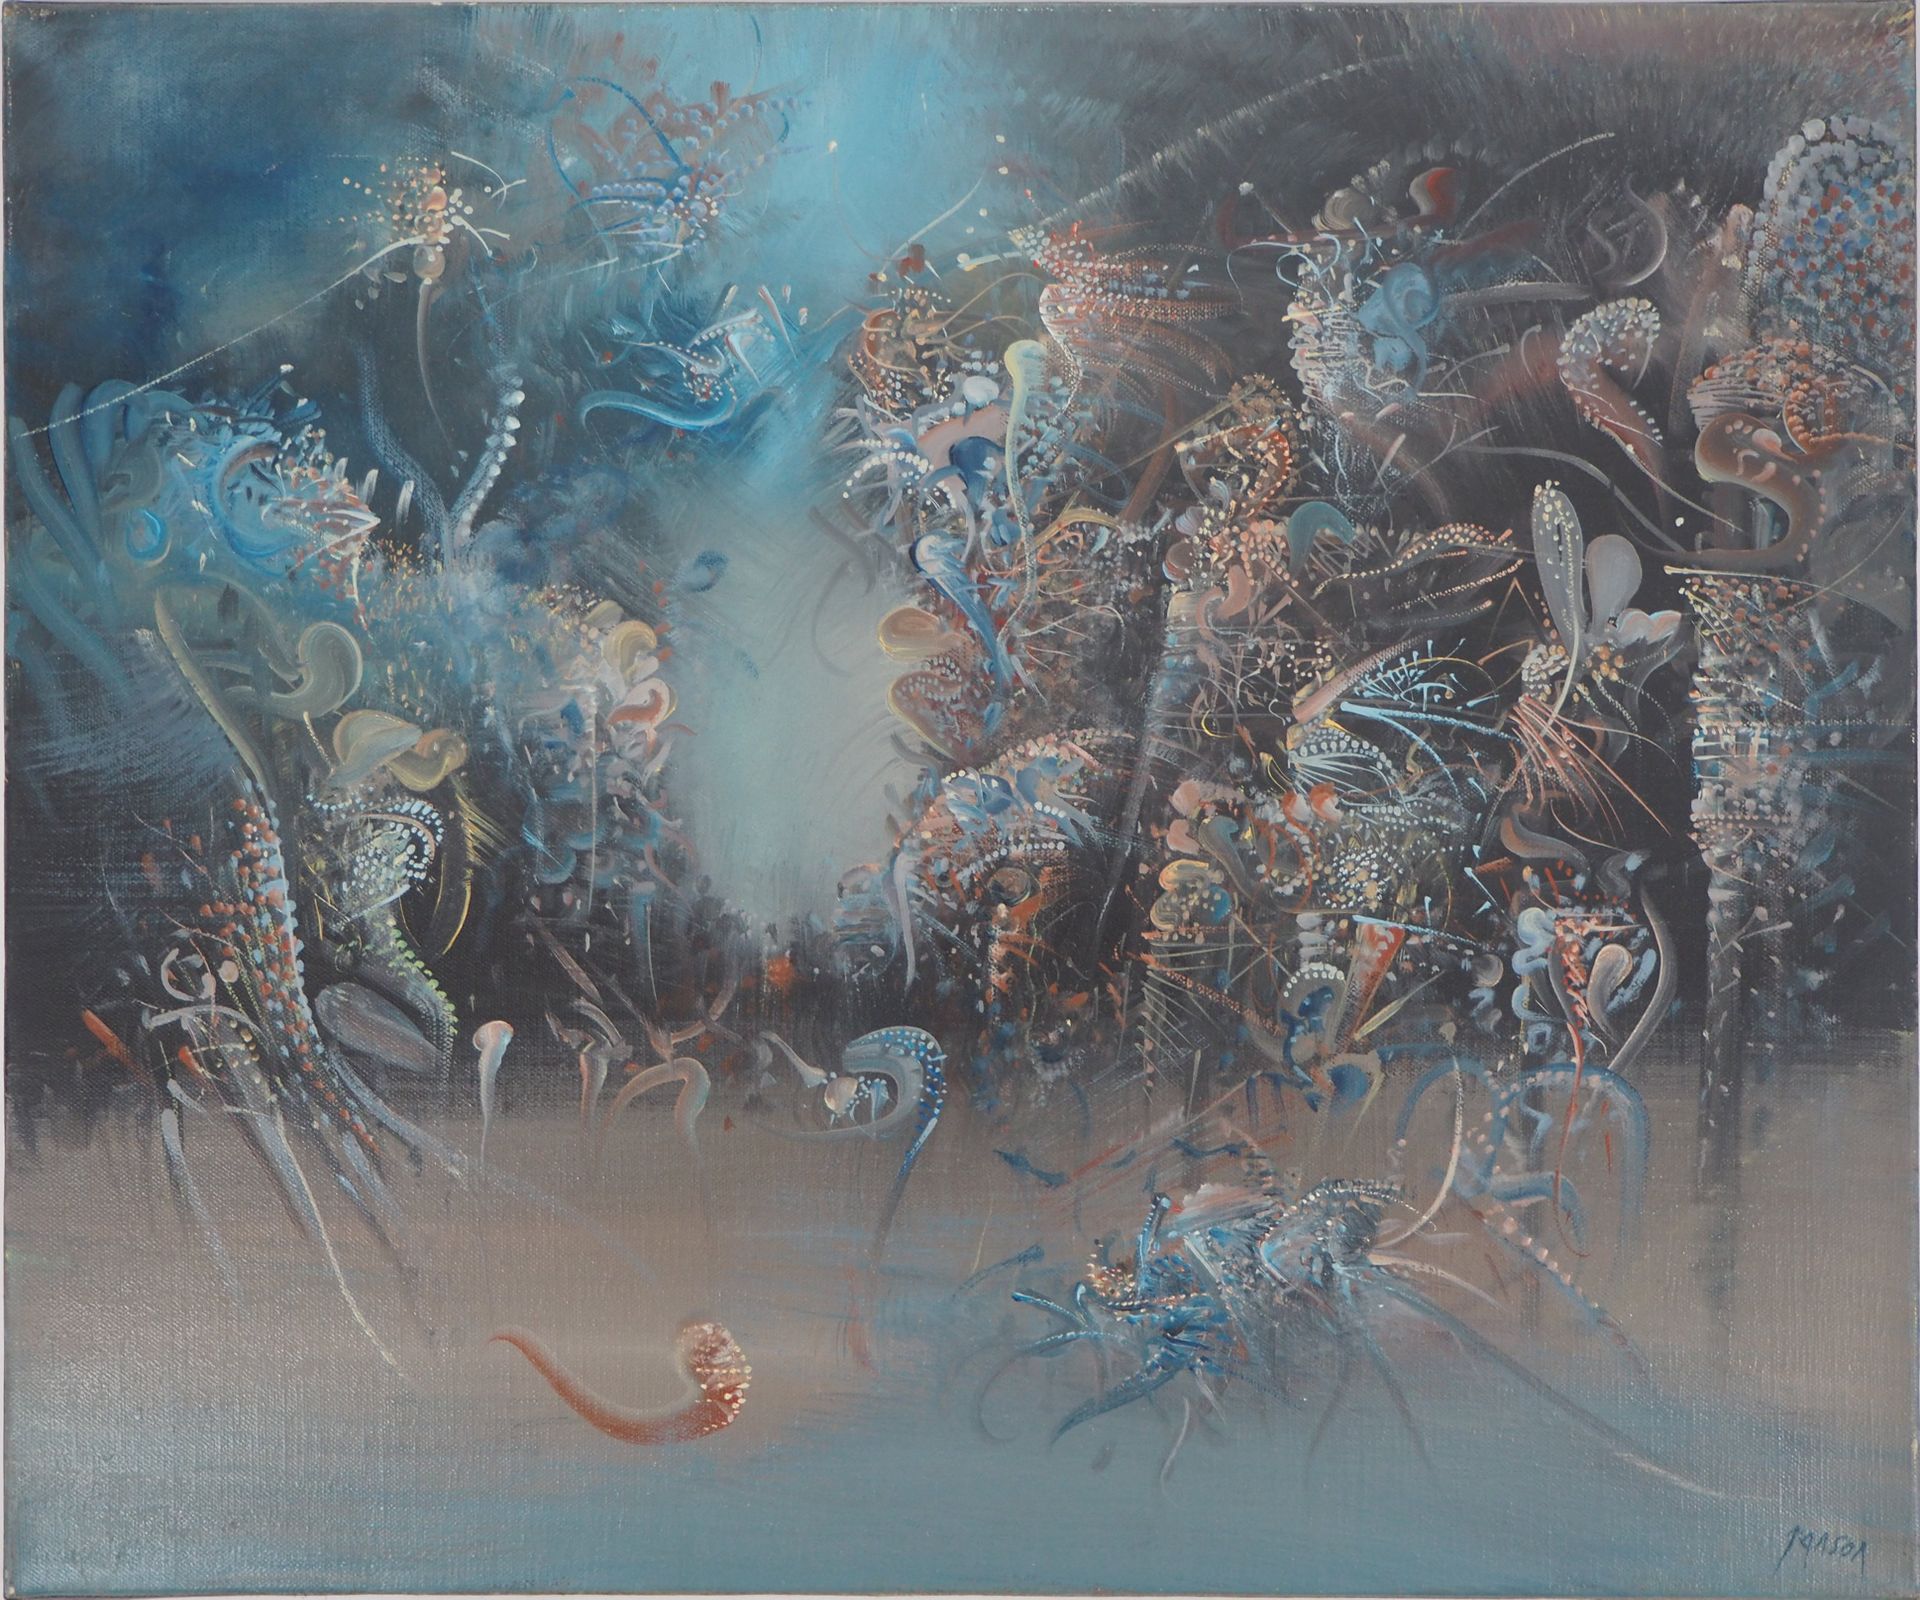 Marc JANSON Marc Janson (1930-)

Surreal sea

Oil on canvas

Signed lower right
&hellip;